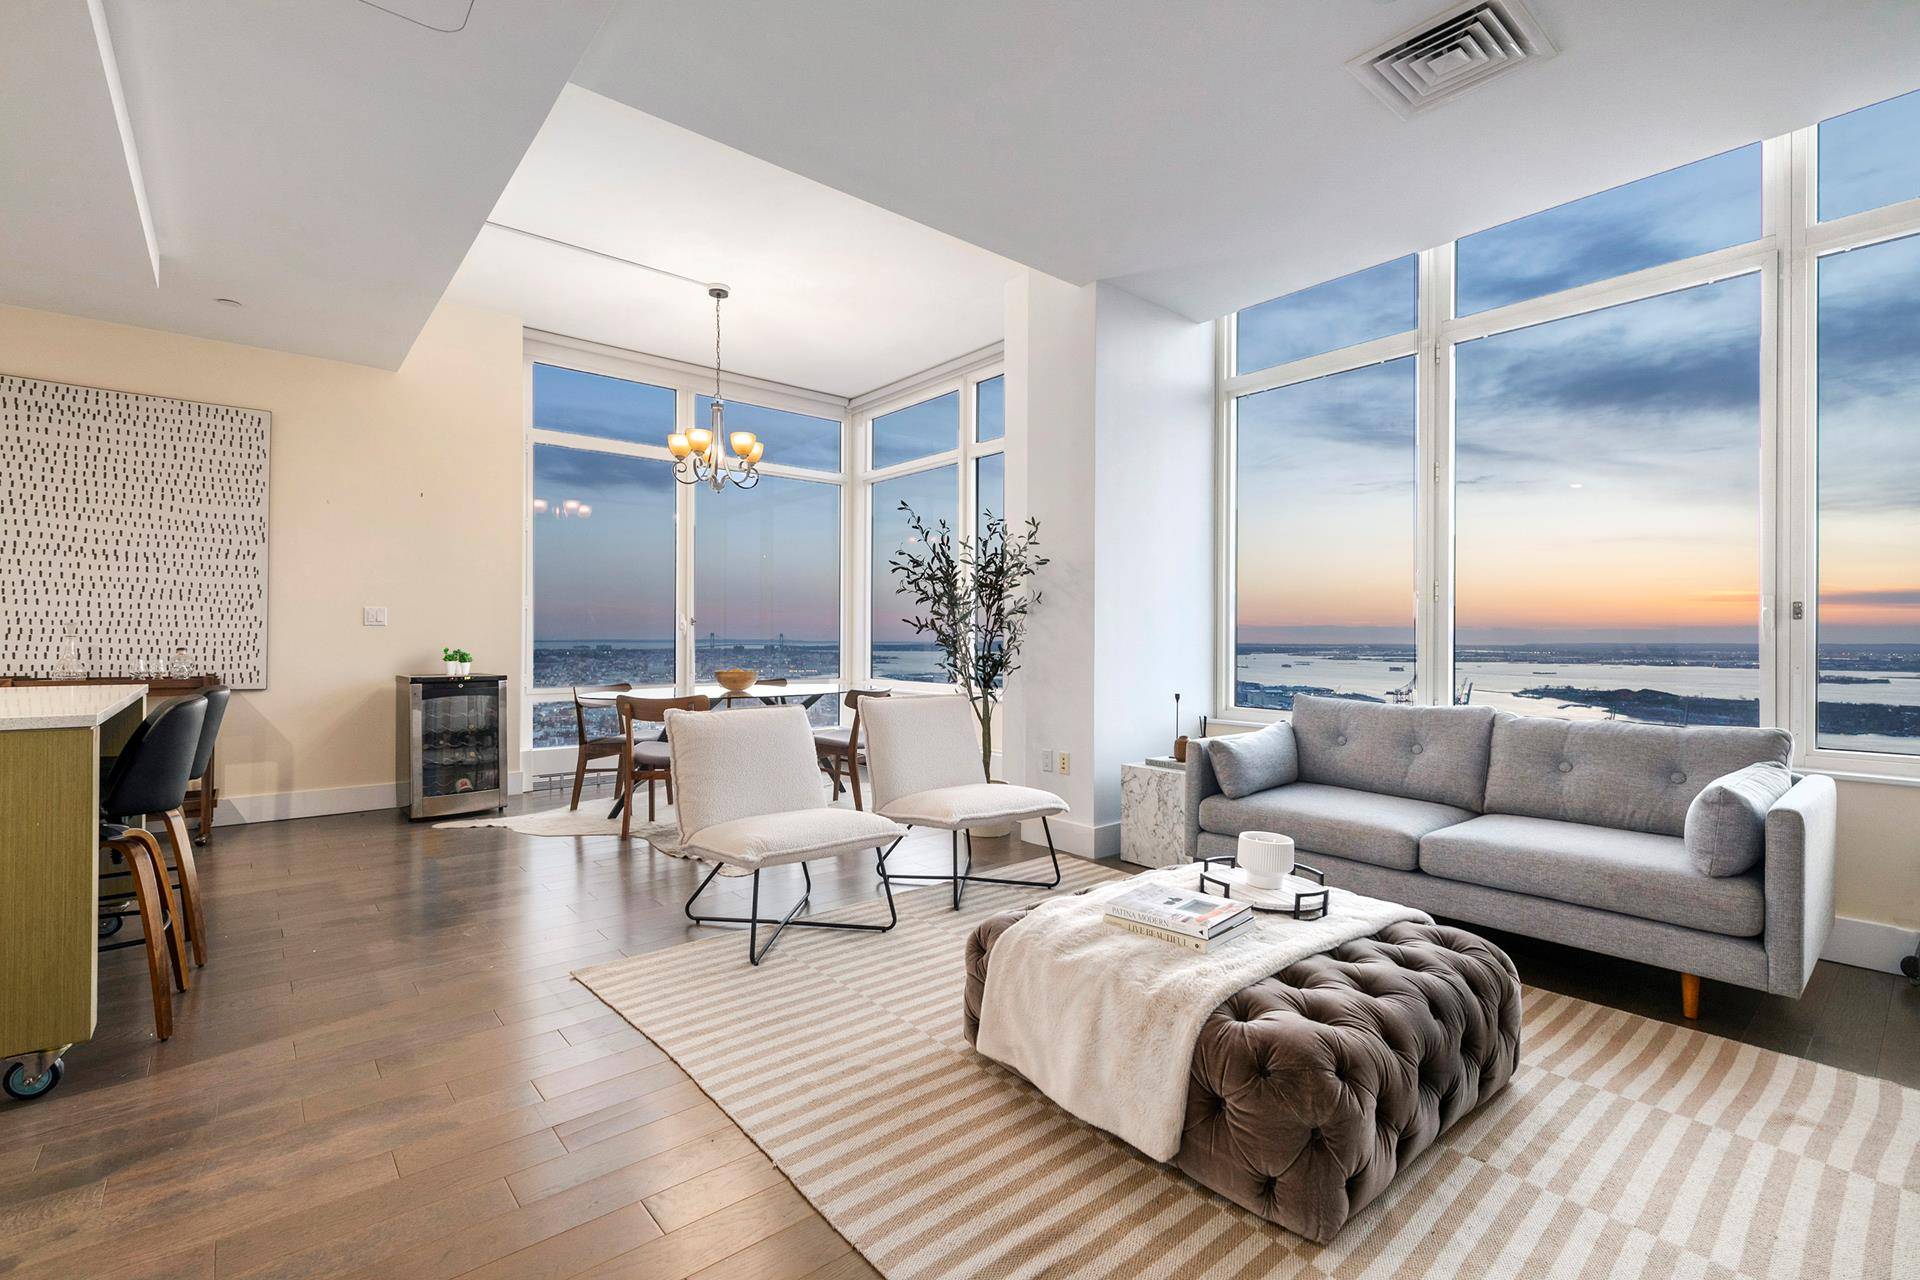 Residence PH49A is an expansive, two bedroom, two bathroom penthouse with triple exposures and is located in one of the most desirable high rise condos in Downtown Brooklyn.